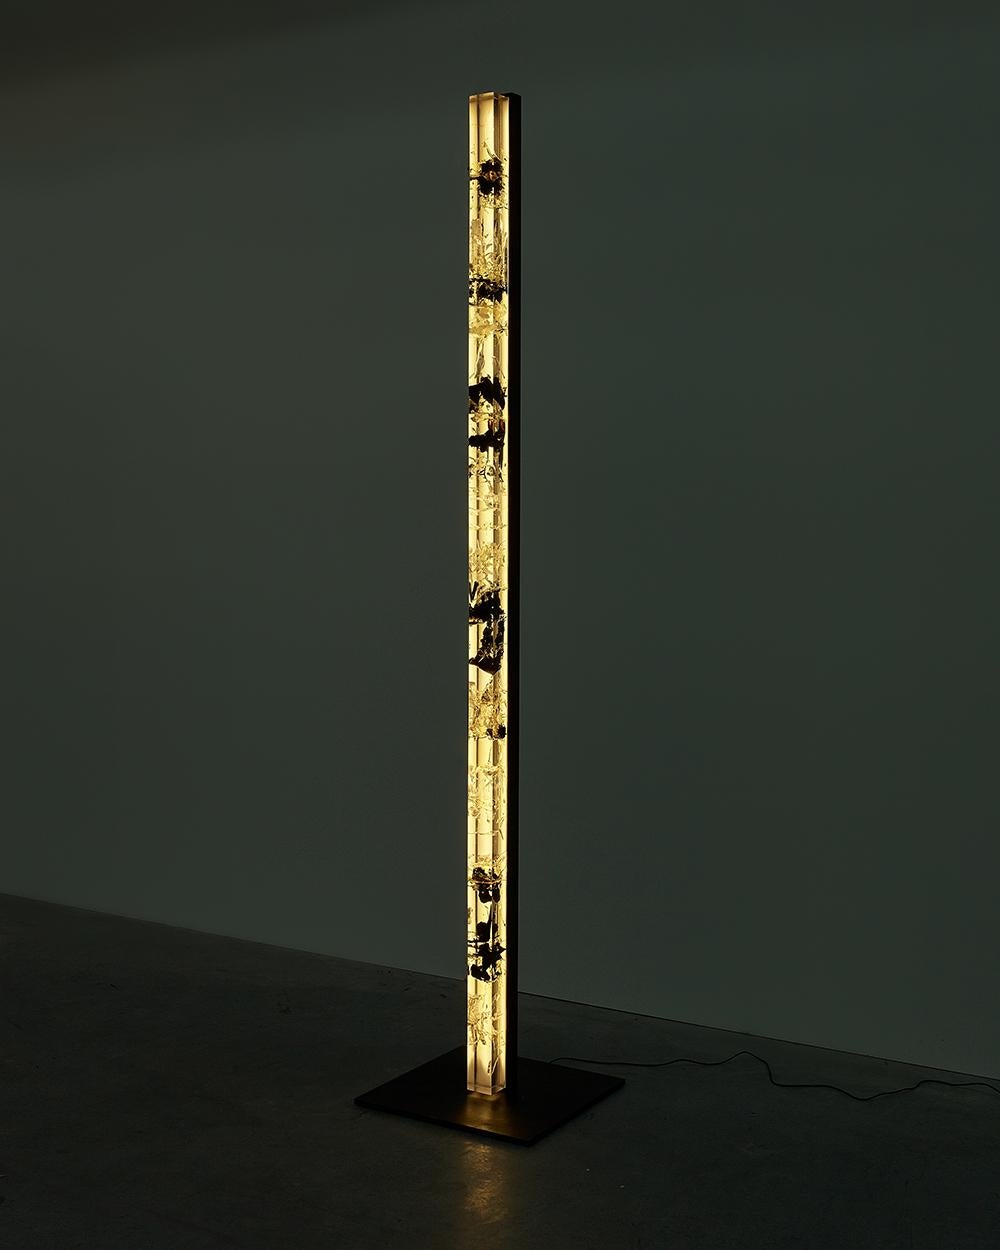 Synthesis S by Tom Price - Resin, tar, acrylic, steel and LED lights sculpture